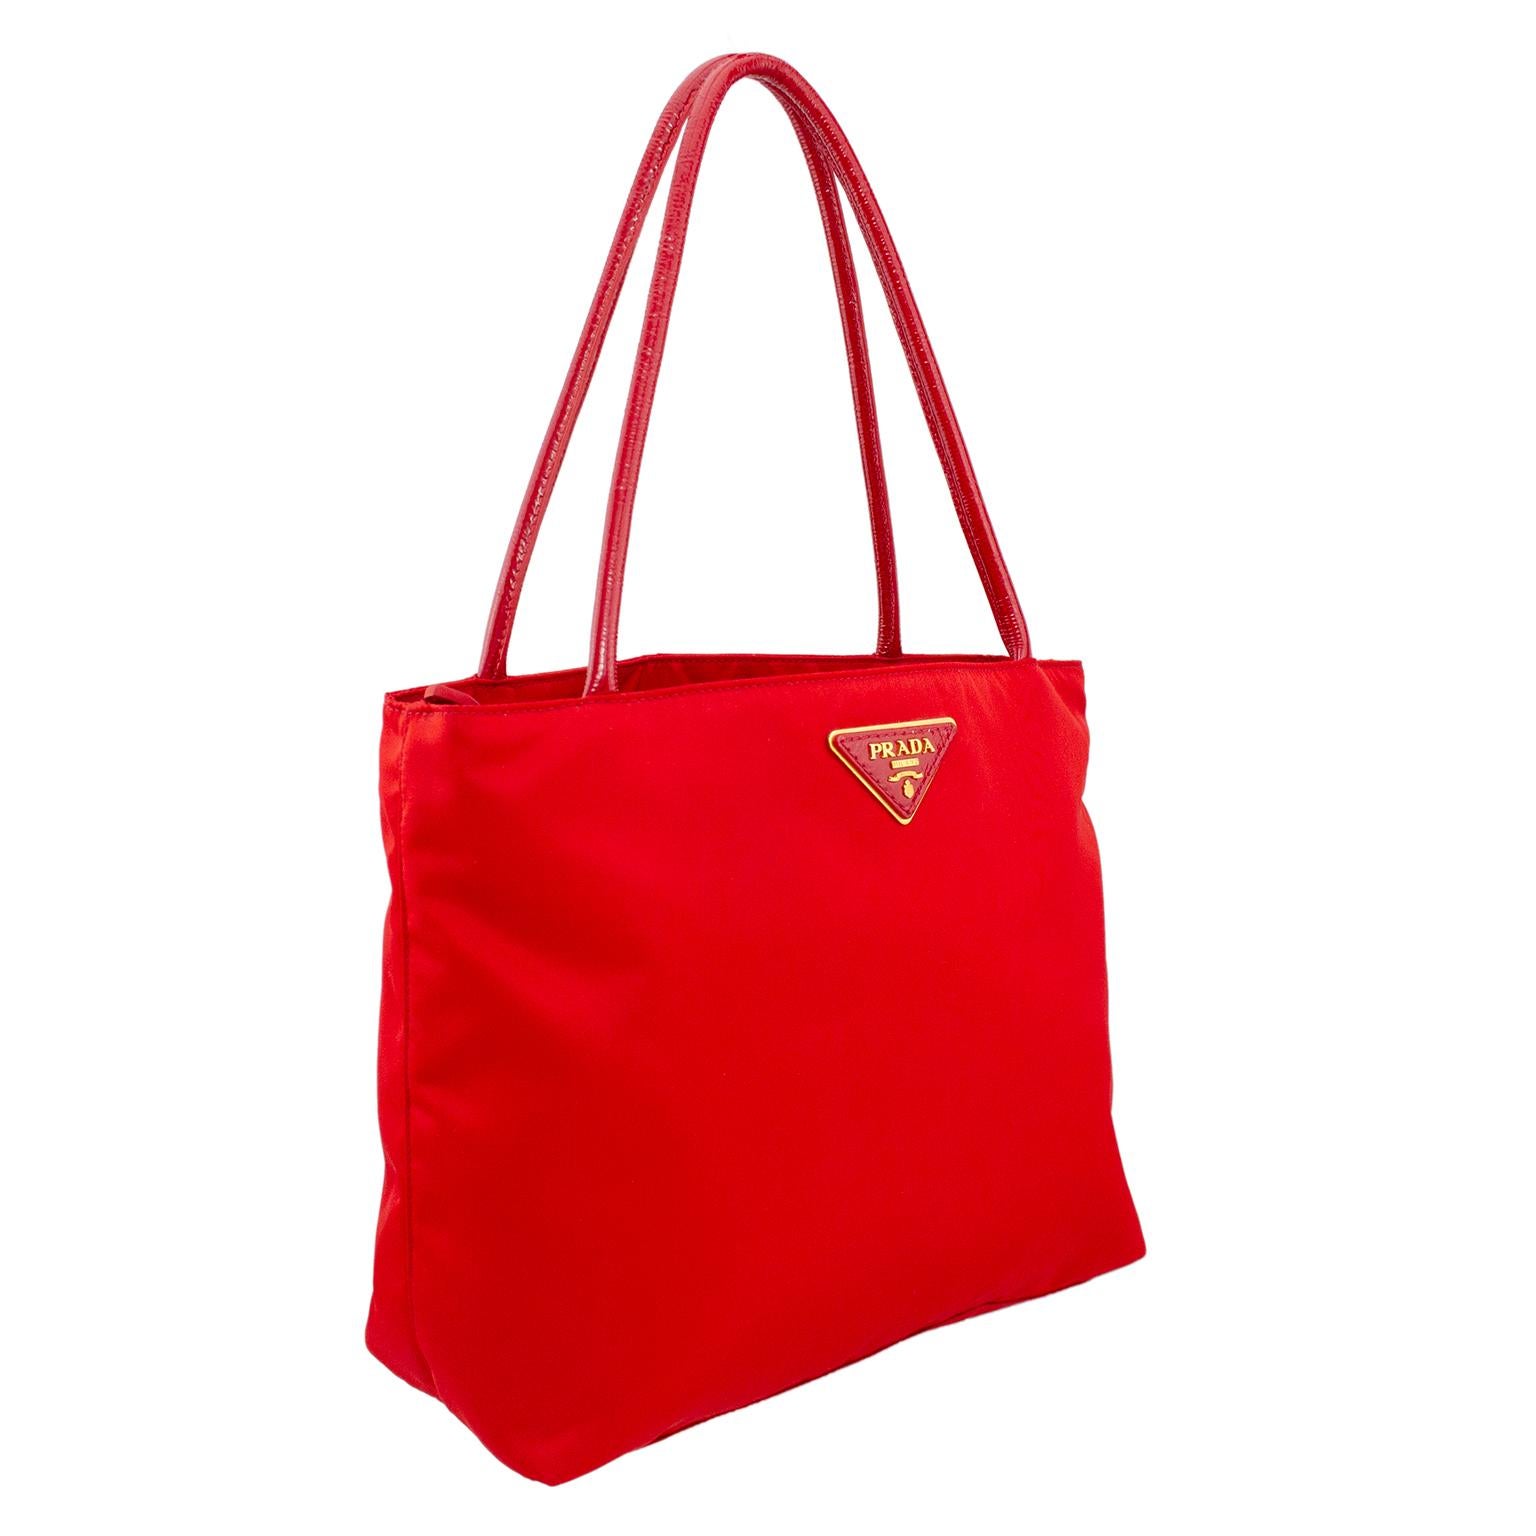 Add the perfect pop of color to any look with this beautiful red Prada nylon medium tote bag from the 1990s. Simple and classic shape with triangular Prada logo and red patent leather handles. Two large open interior compartments divided by a third